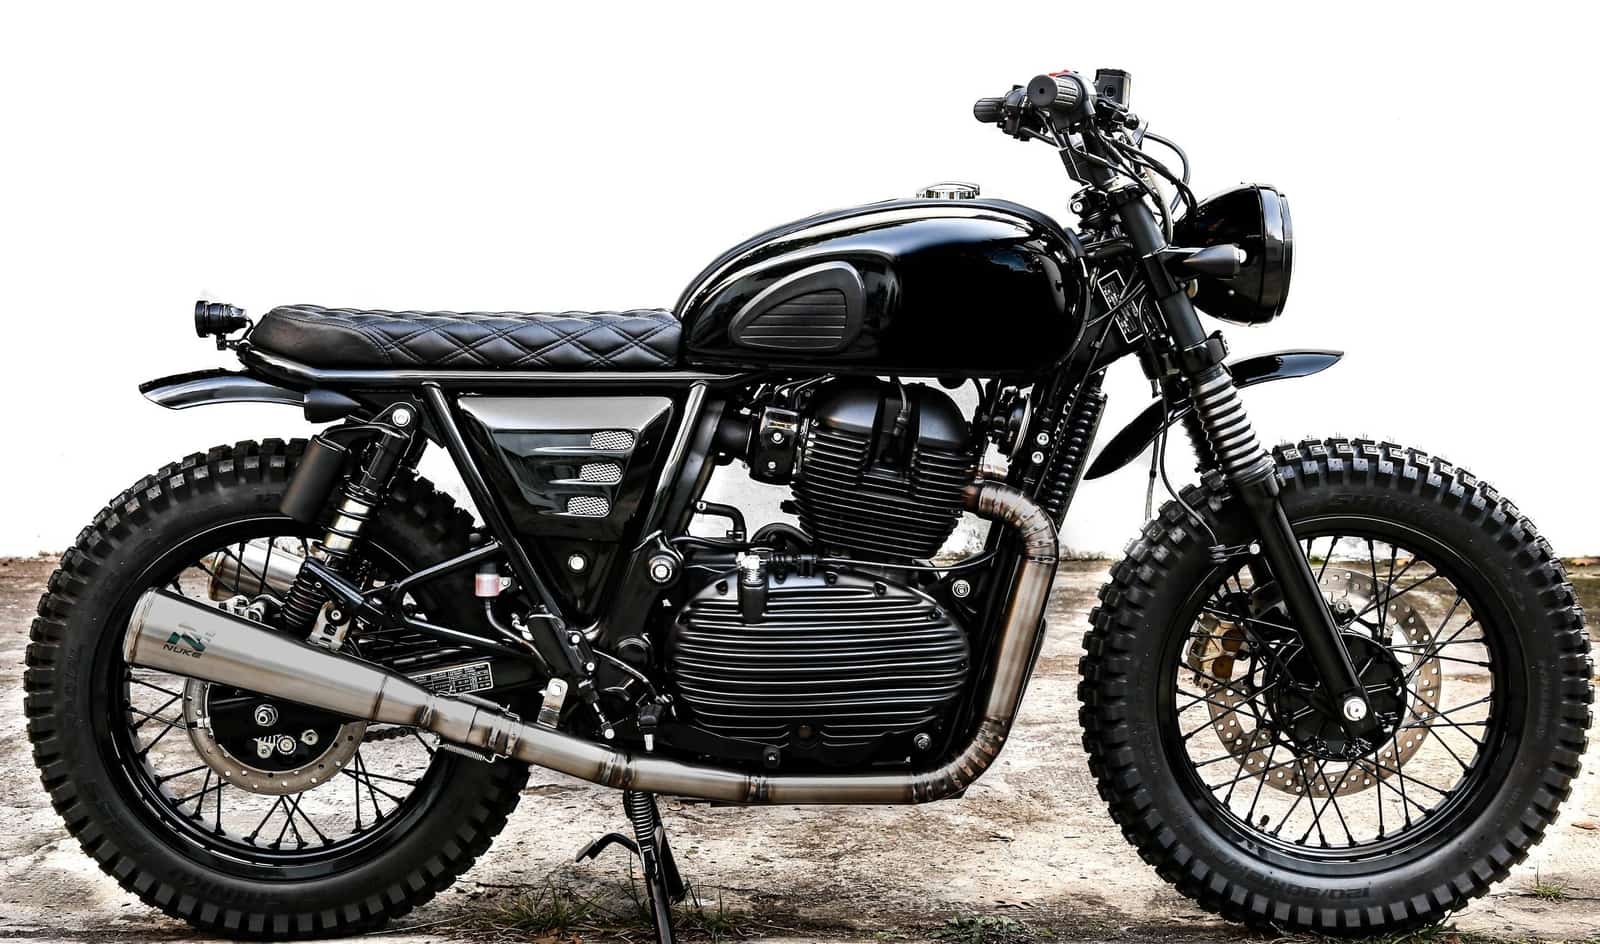 This Royal Enfield 650 Scrambler Project Is A Custom-Built Beauty